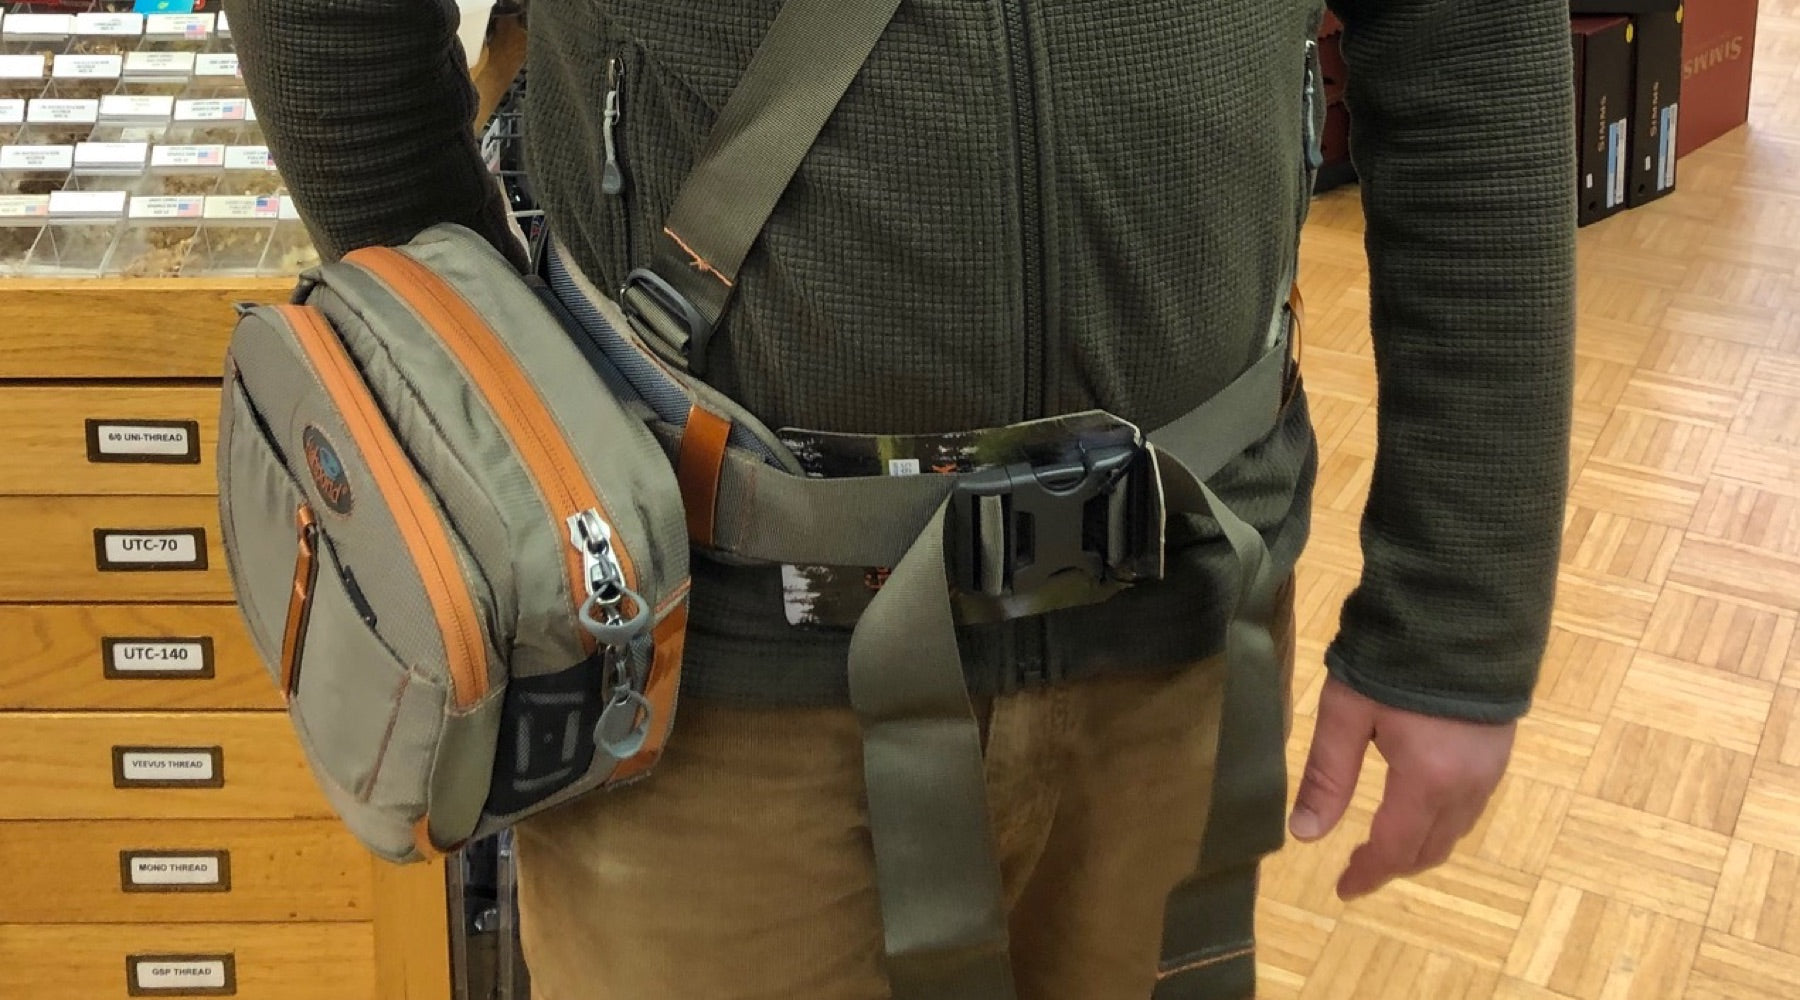 Gear Review: The Fishpond Switchback Belt System